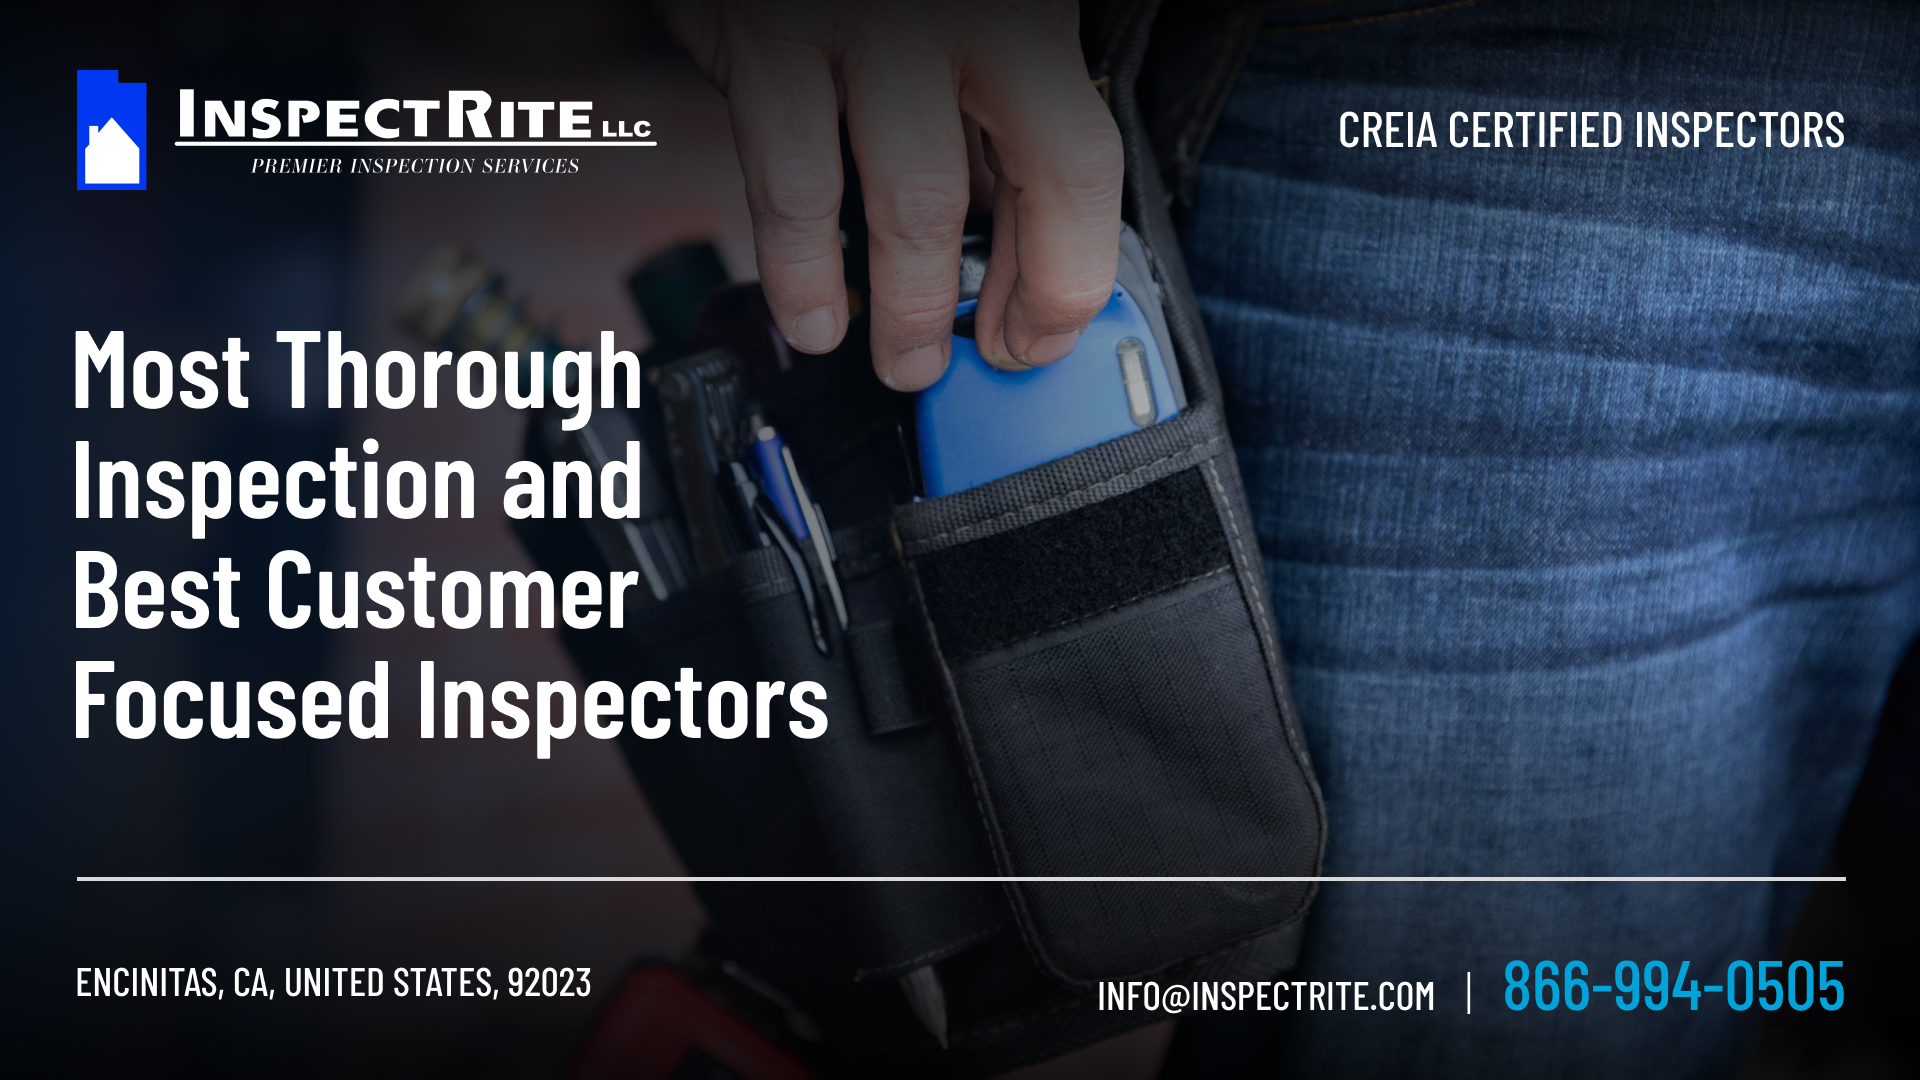 Home Inspection San Diego